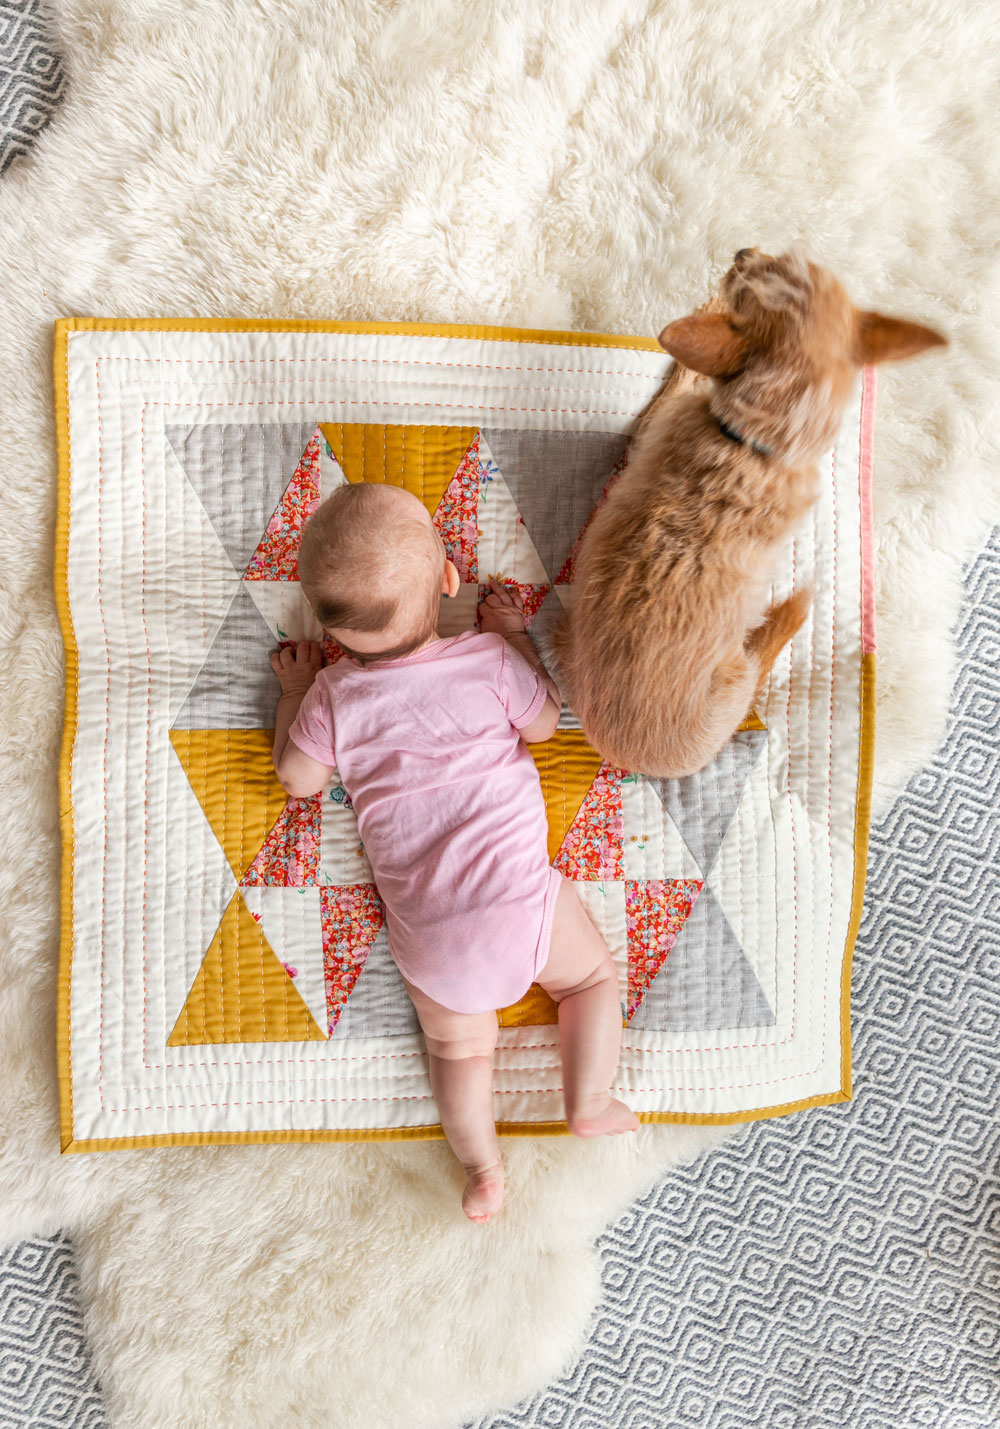 This FREE quilt pattern download, Liberty & Flowers, uses templates, making it the perfect sewing project for fussy cutting and scrap fabric. suzyquilts.com